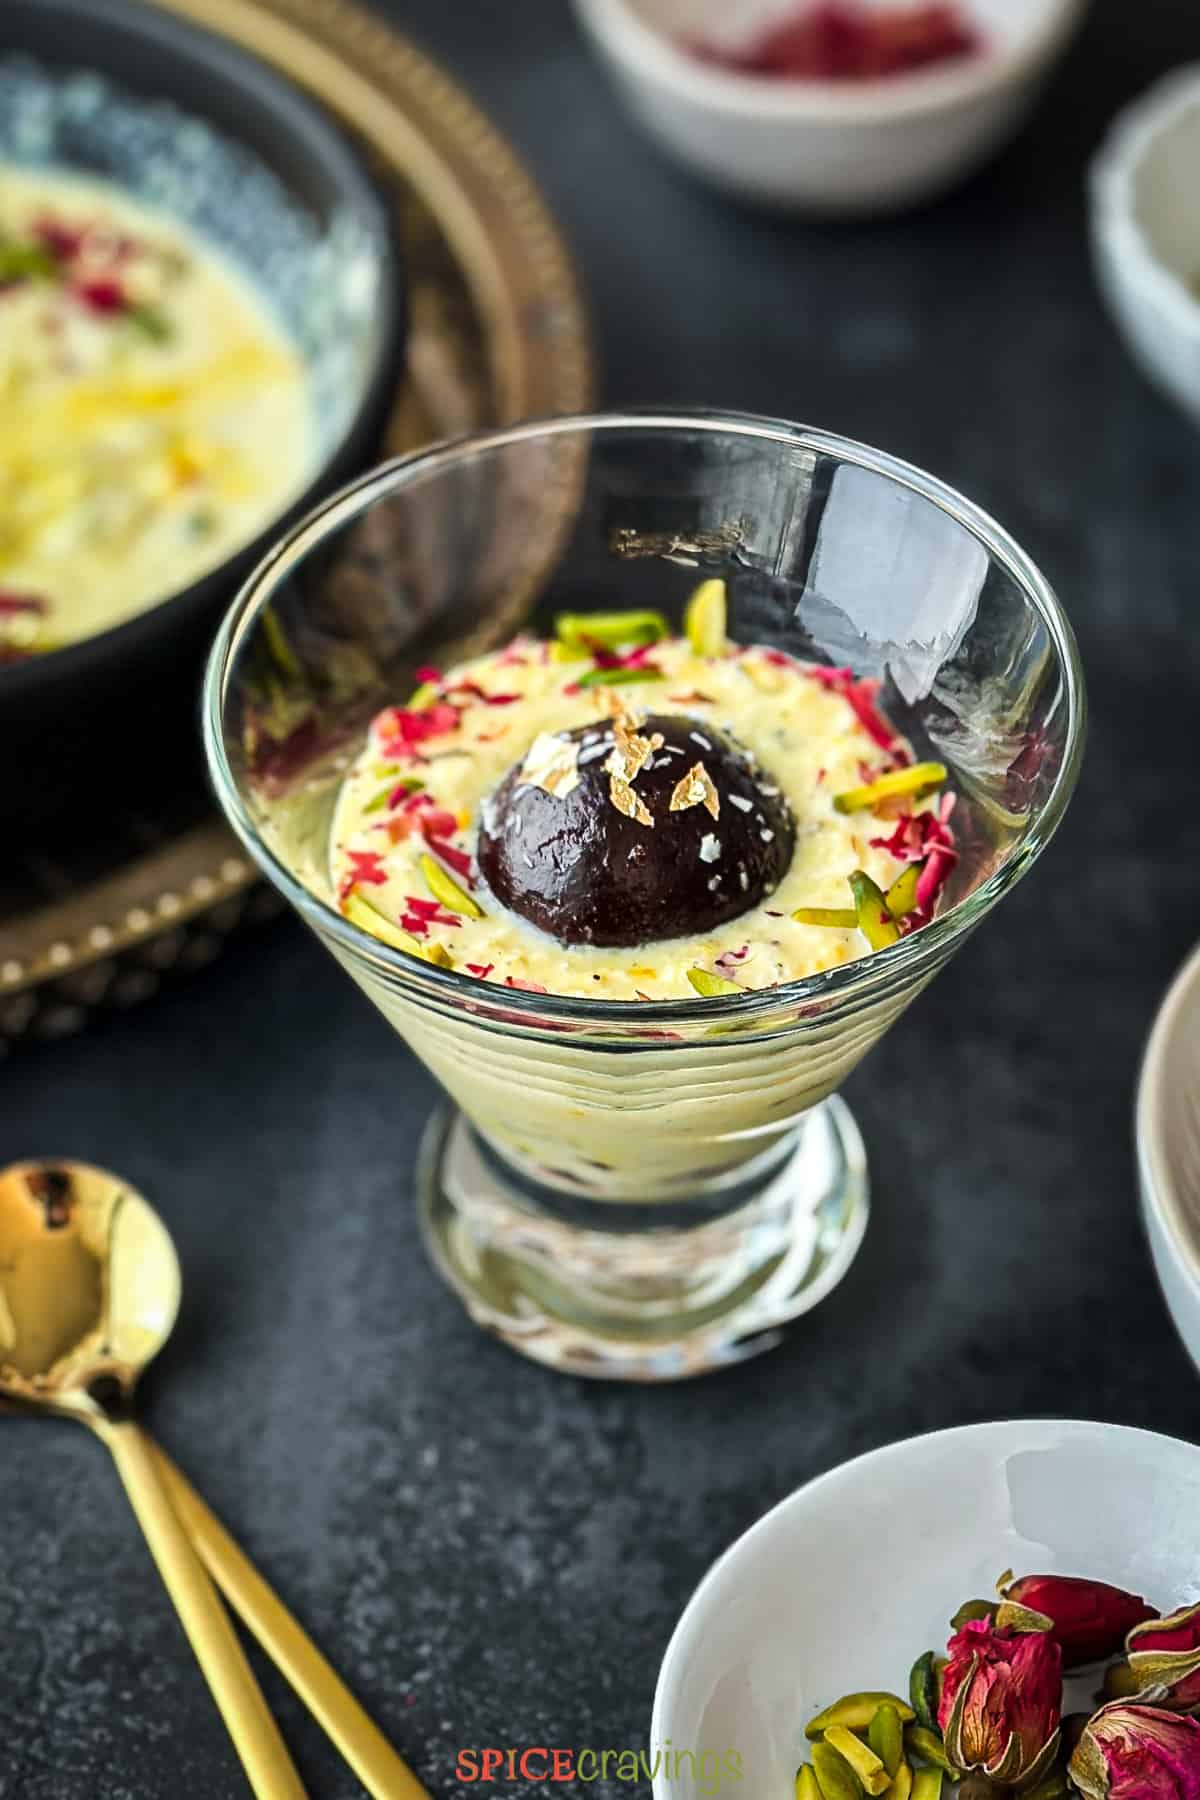 Black Gulab jamun dipped in a glass of rabdi and garnished with rose and pistachios